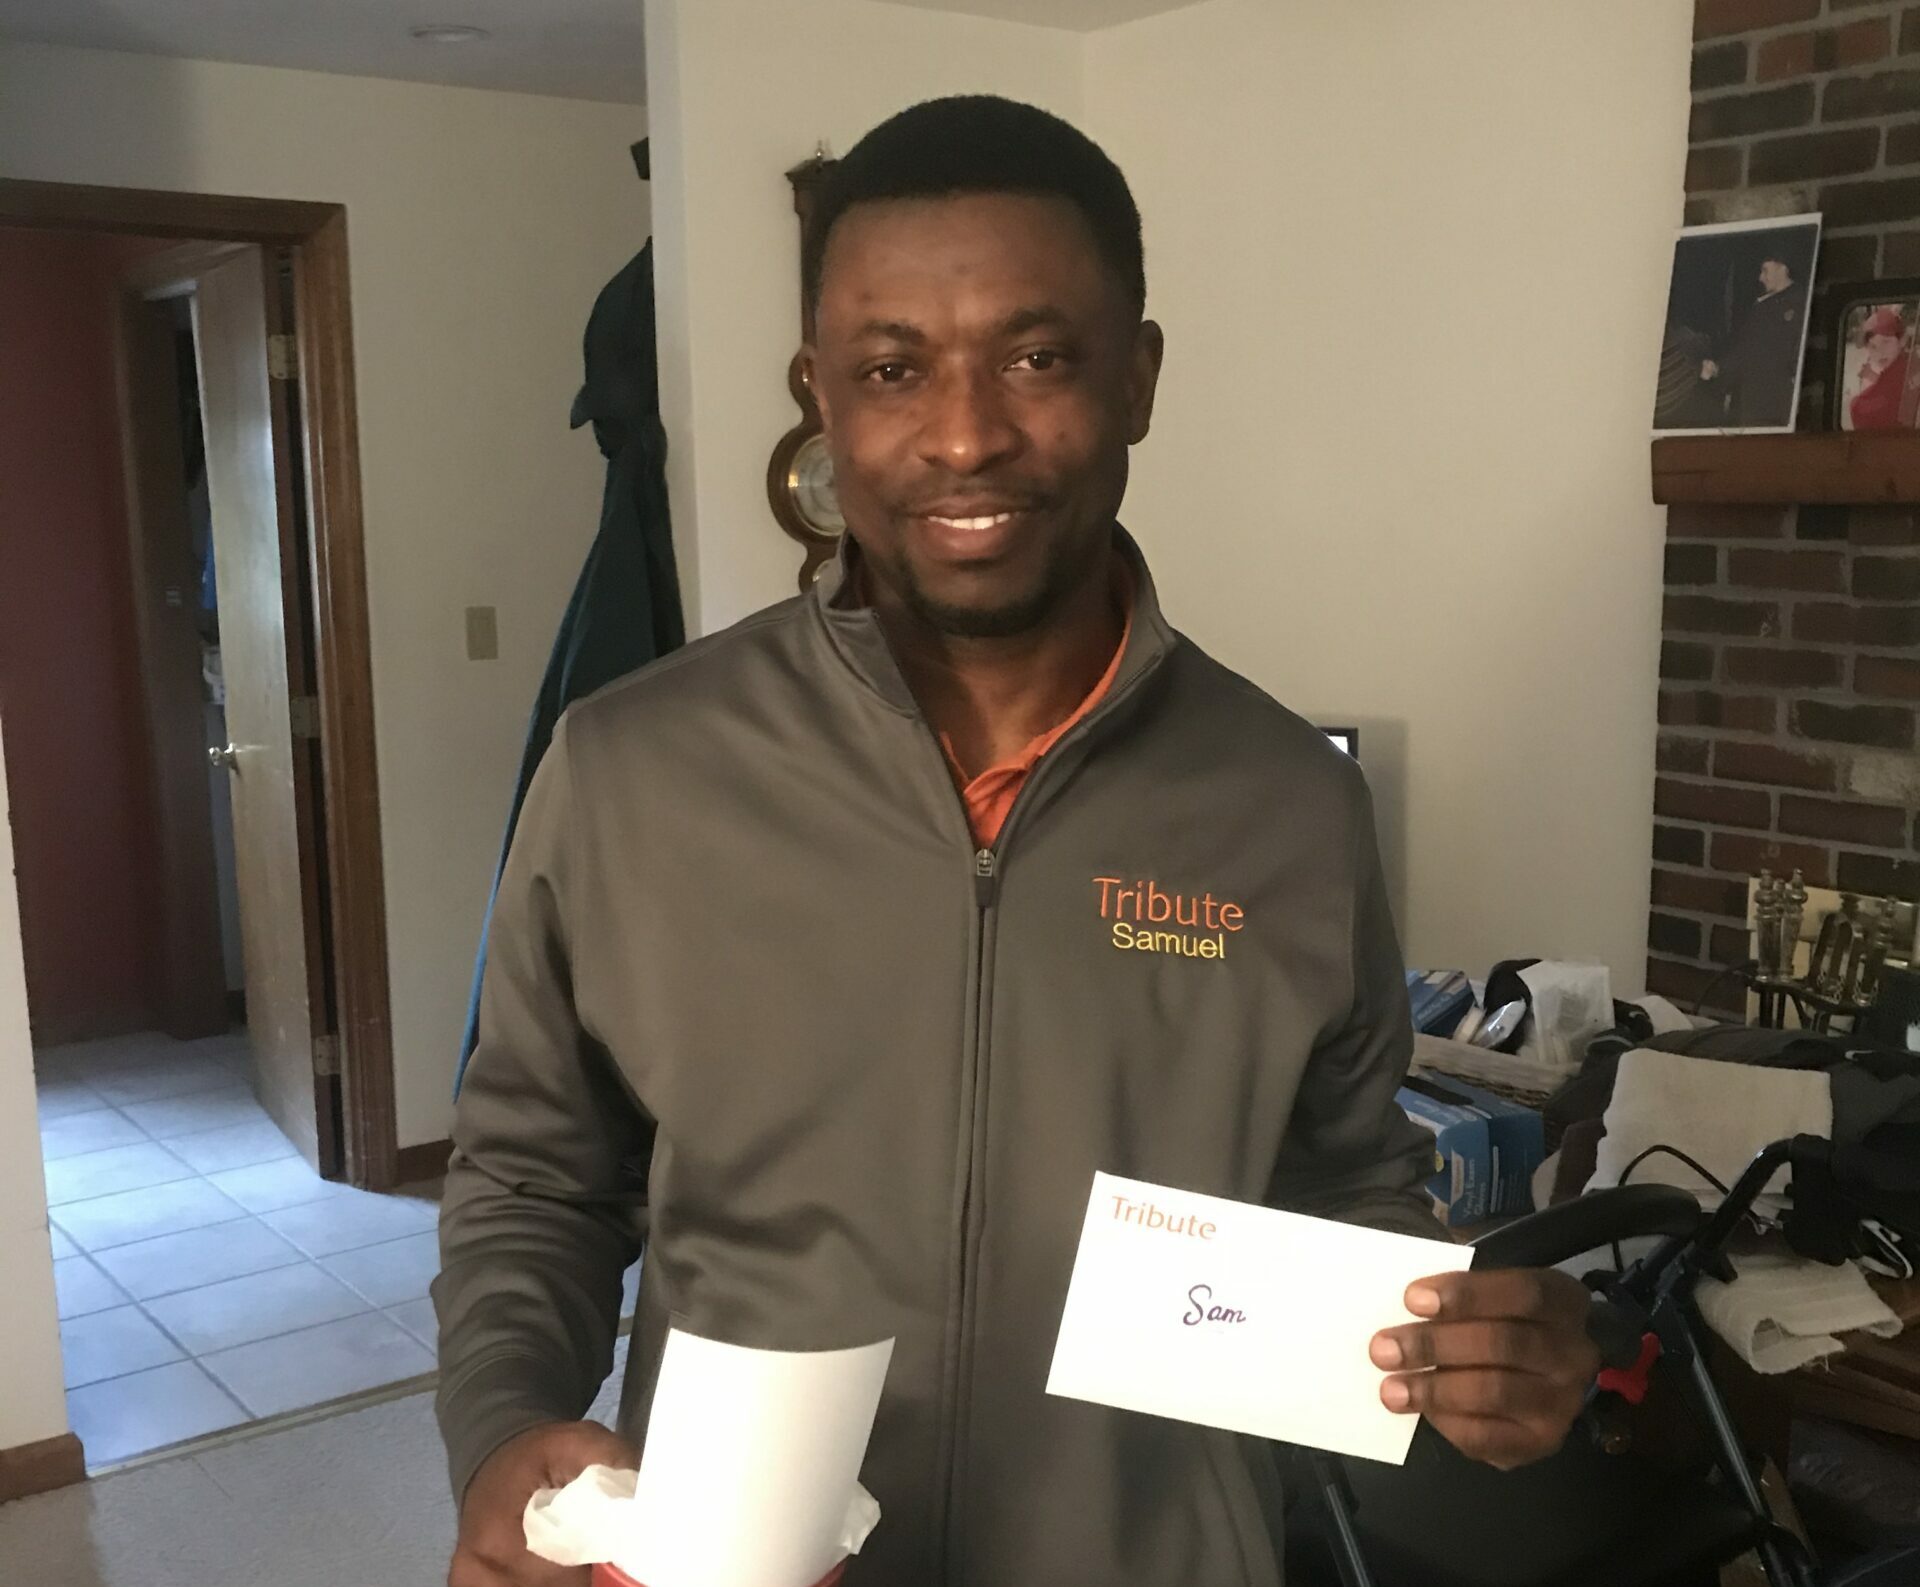 Tribute Caregiver Samuel smiles holding gift and card from Tribute Home Care